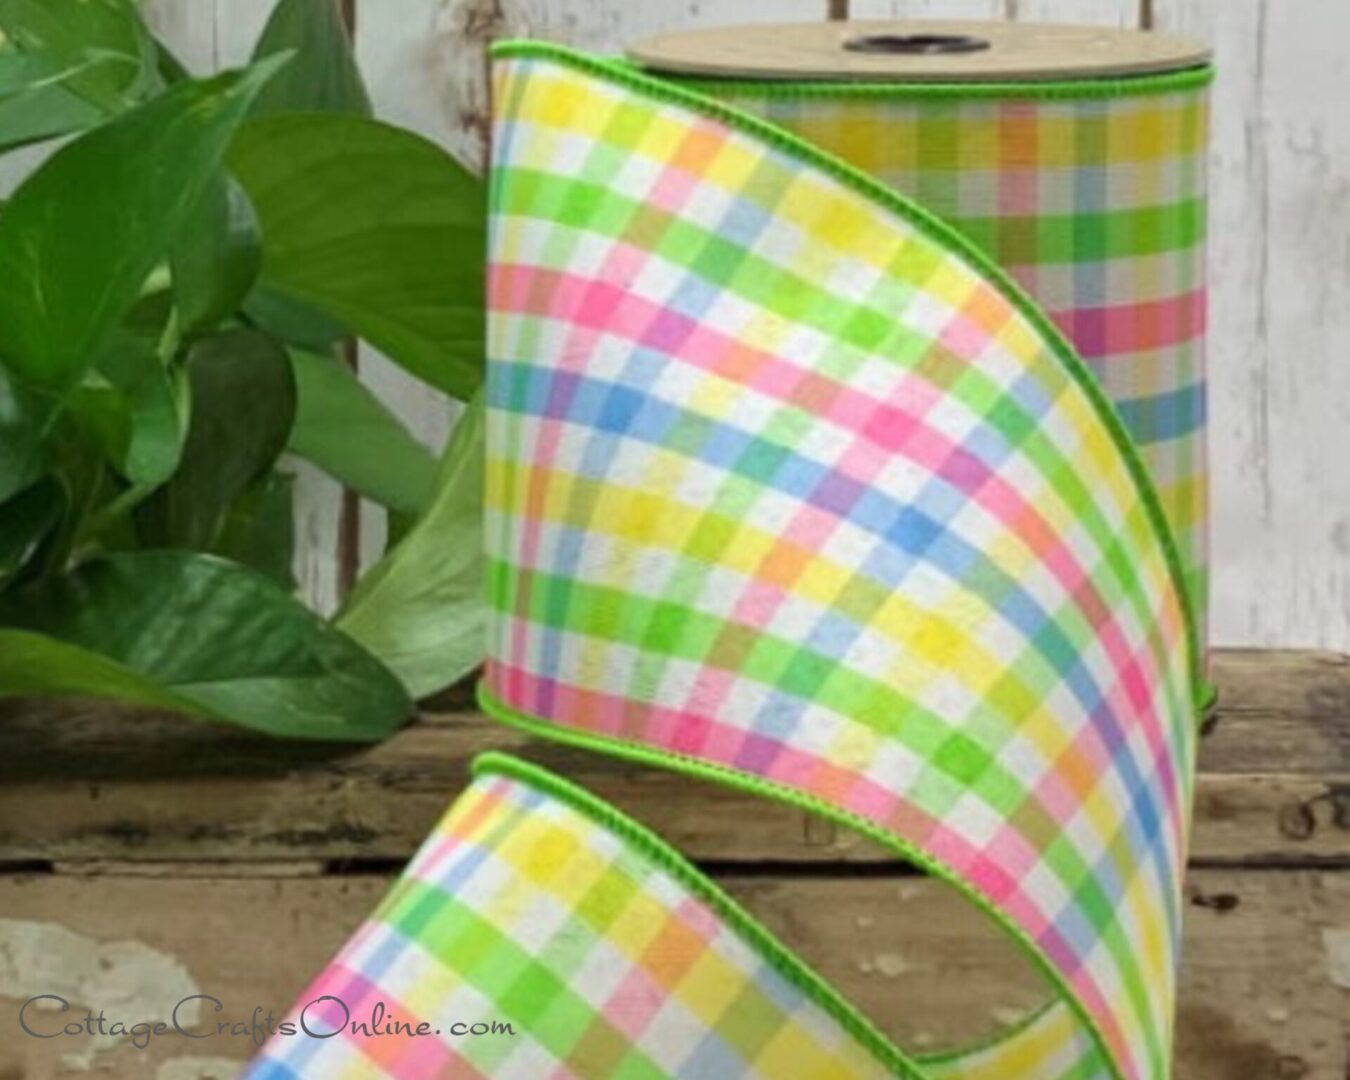 A close up of the ribbon on a chair